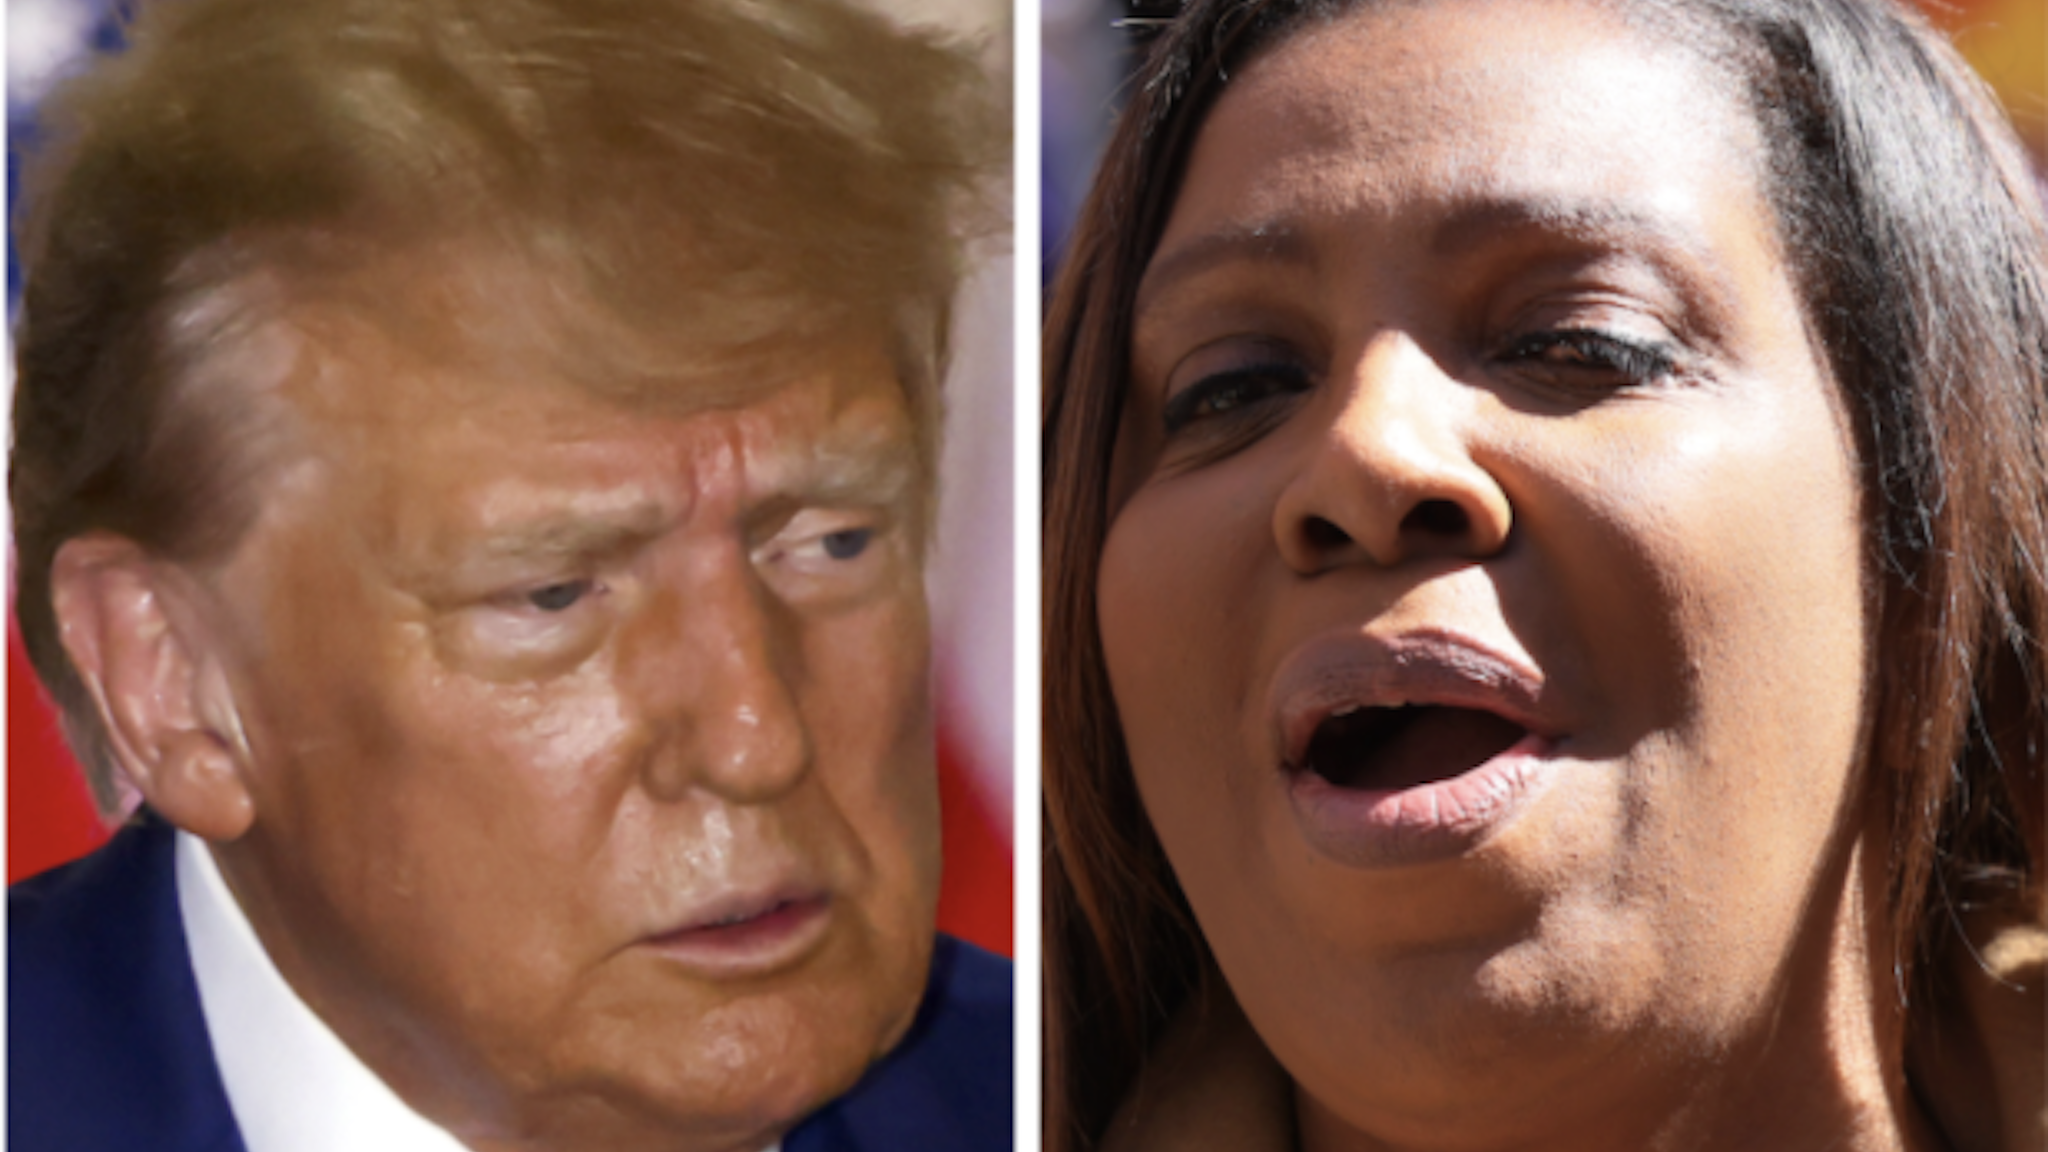 Trump is due back in New York Thursday to be deposed in a $250 million civil suit brought by state Attorney General Letitia James.